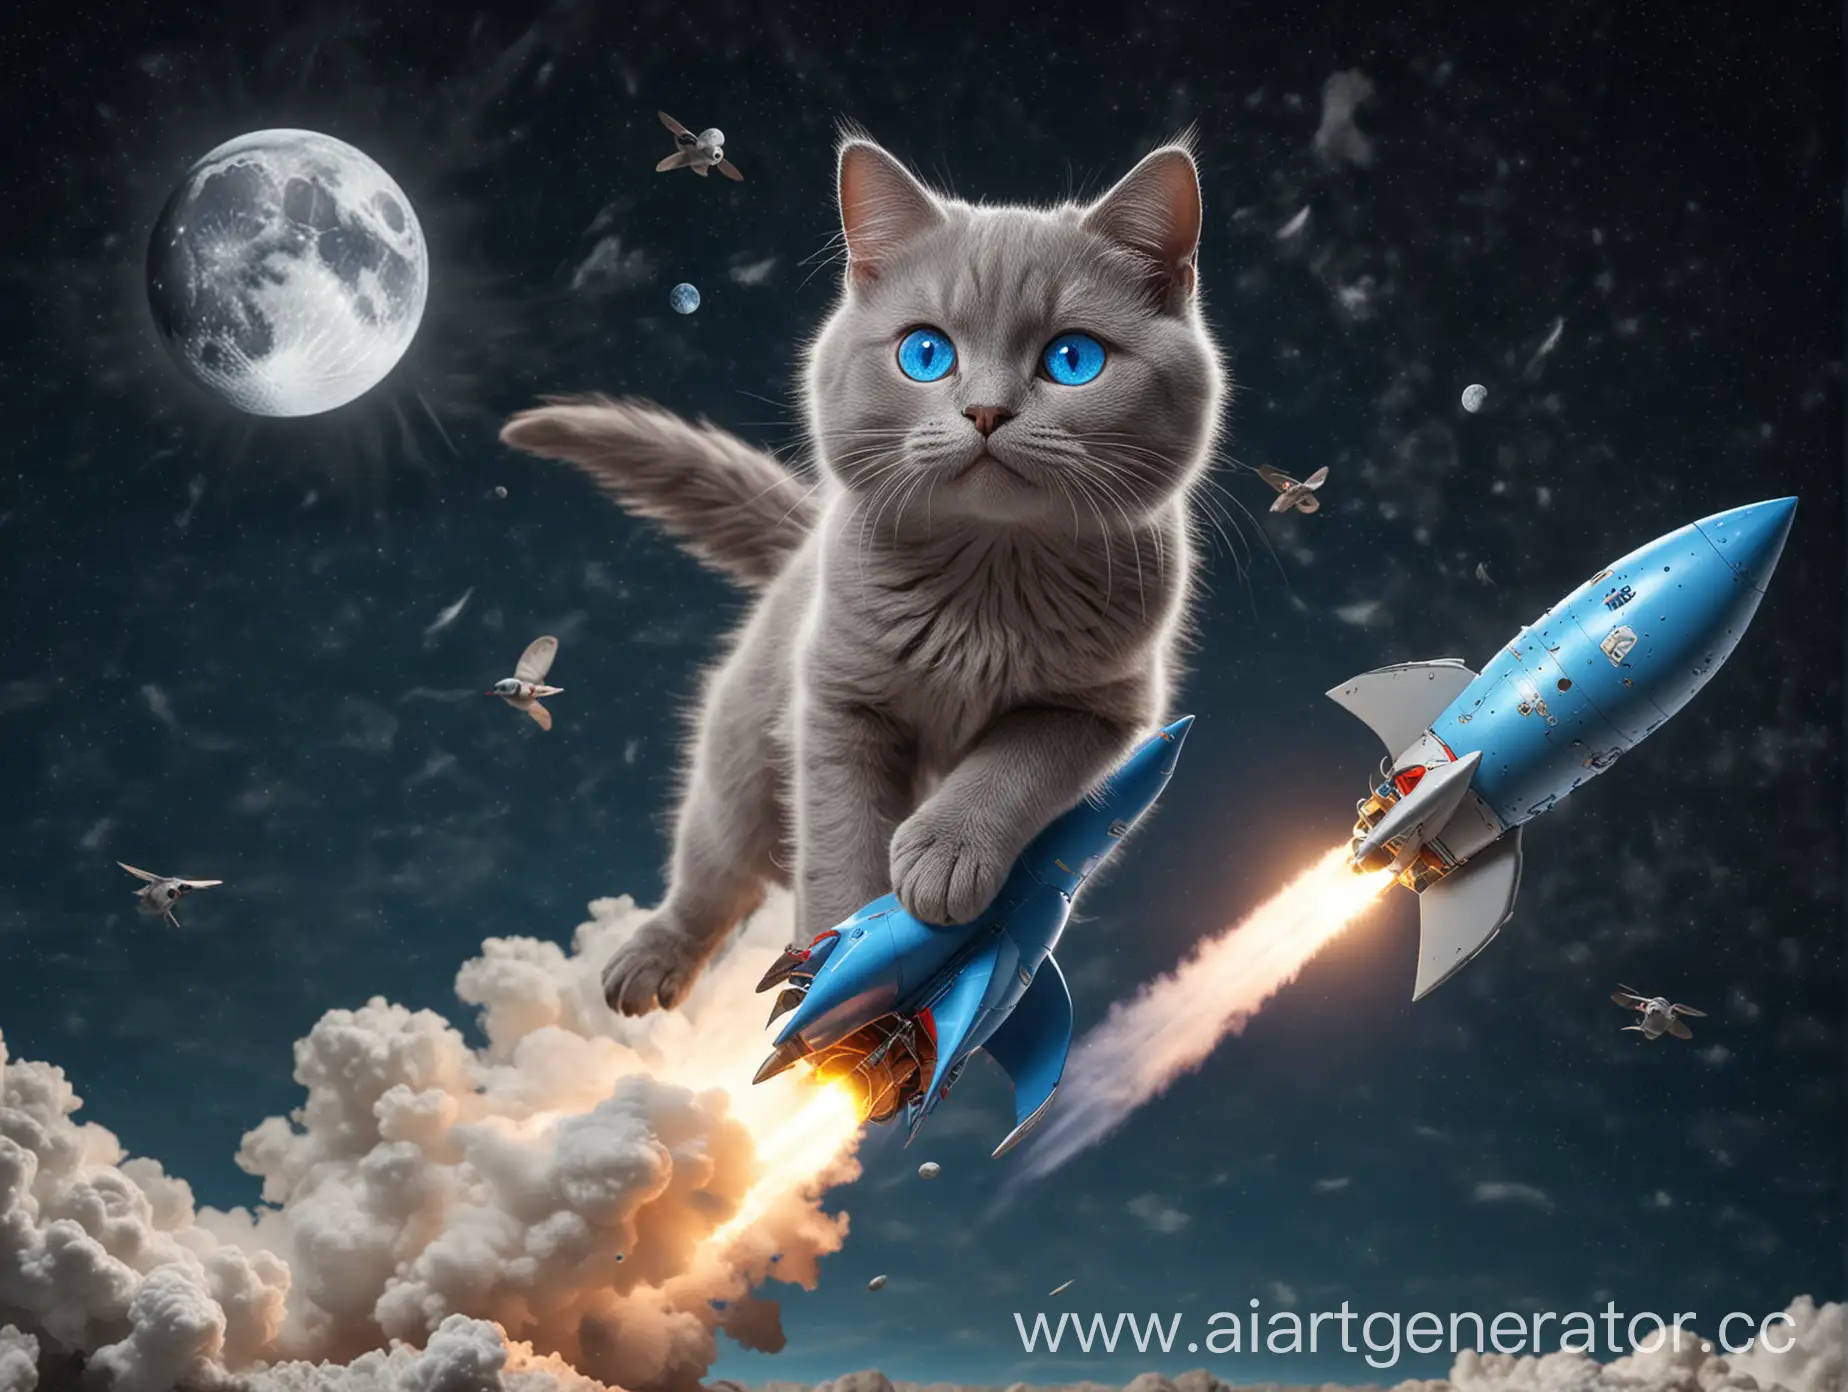 Adventurous-Gray-Cat-with-Blue-Eyes-on-a-Moon-Rocket-Journey